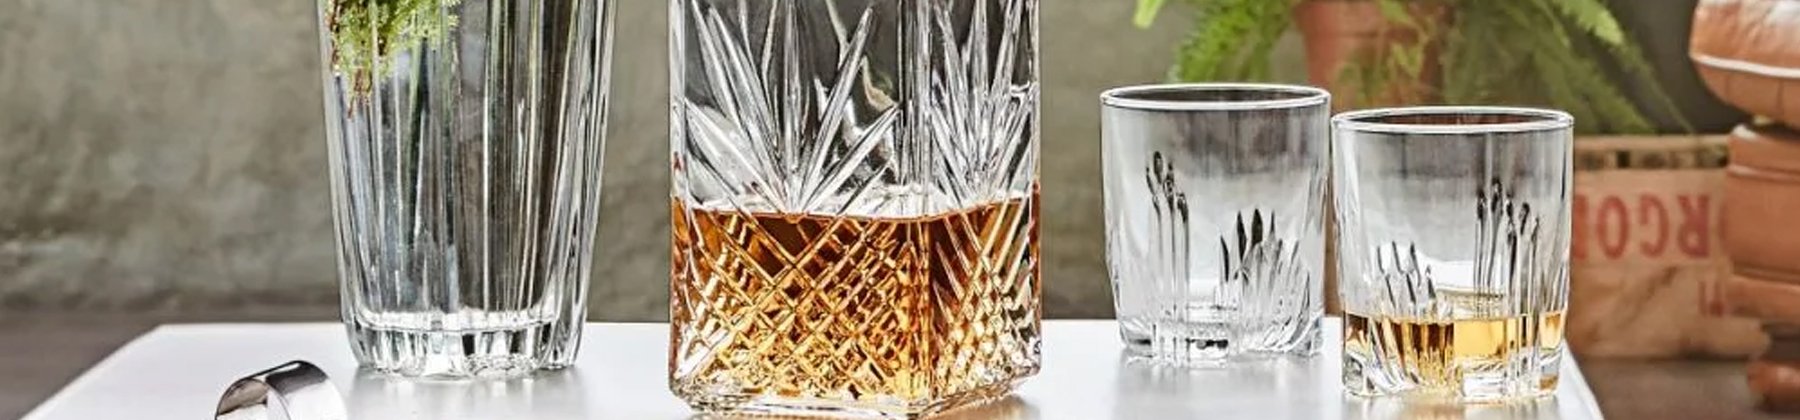 https://cdn.everythingkitchens.com/media/wysiwyg/images/Category_Headers/Cocktails-and-Spirits-Glassware-NEW.jpg